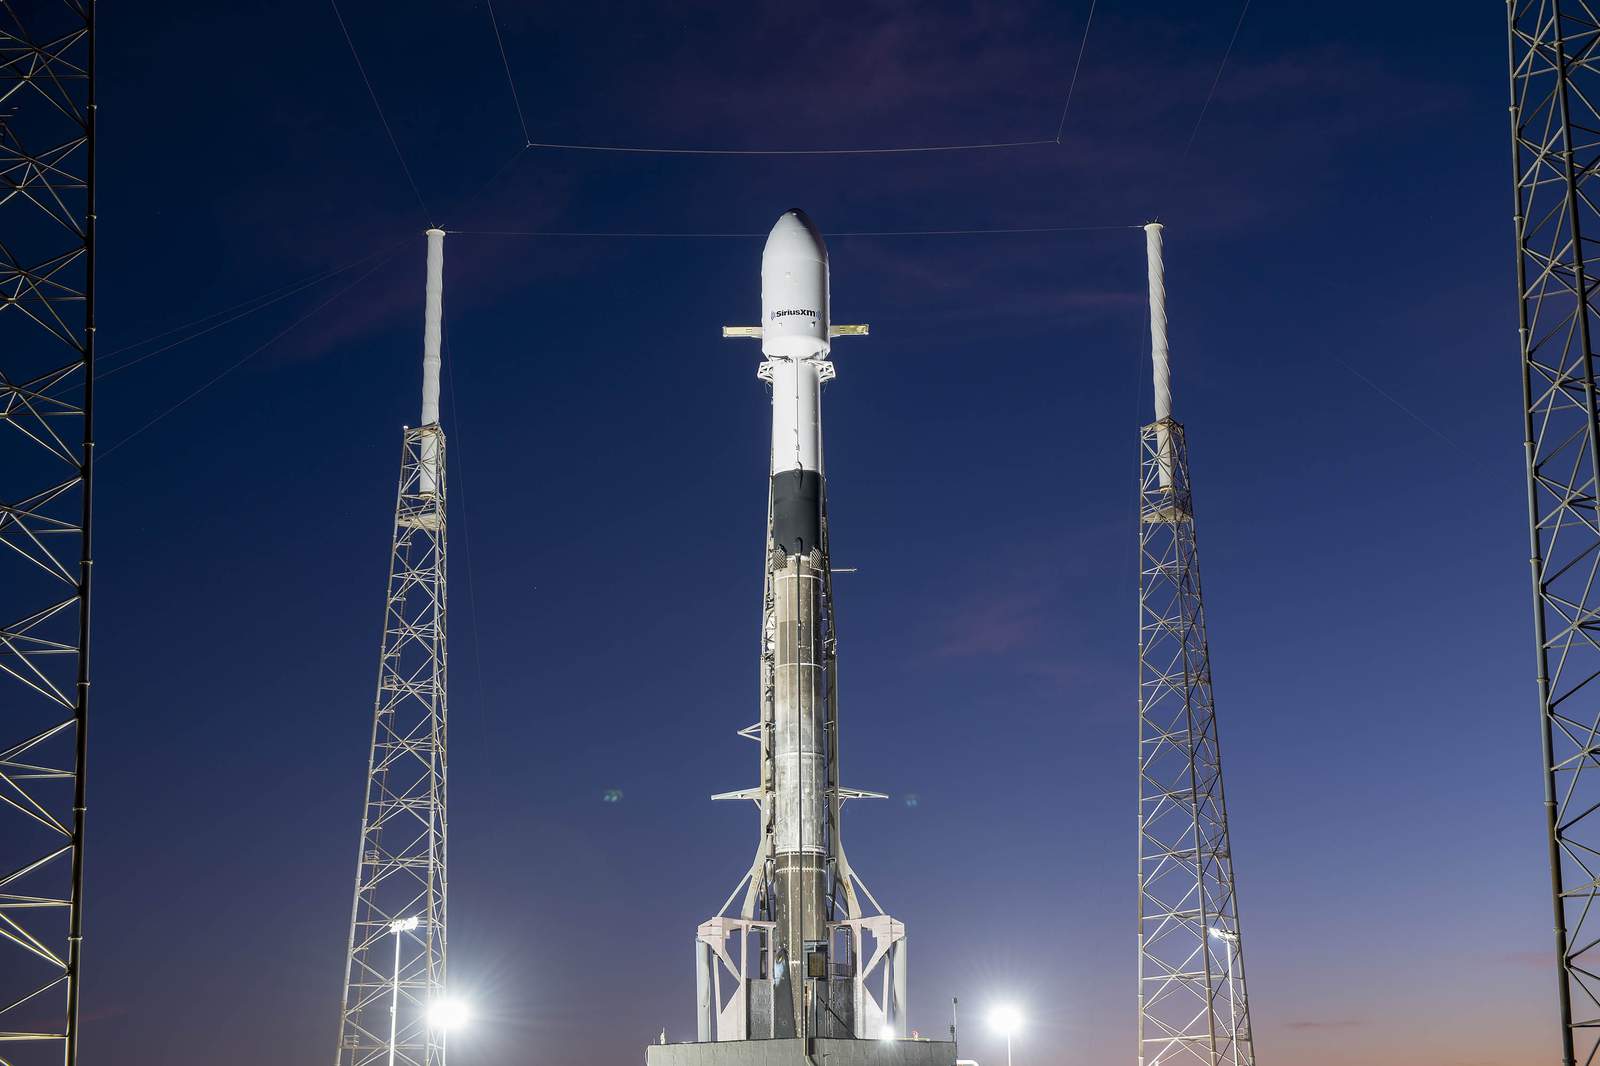 The final SpaceX rocket launch of 2020 to bring the Sonic boom to Central Florida